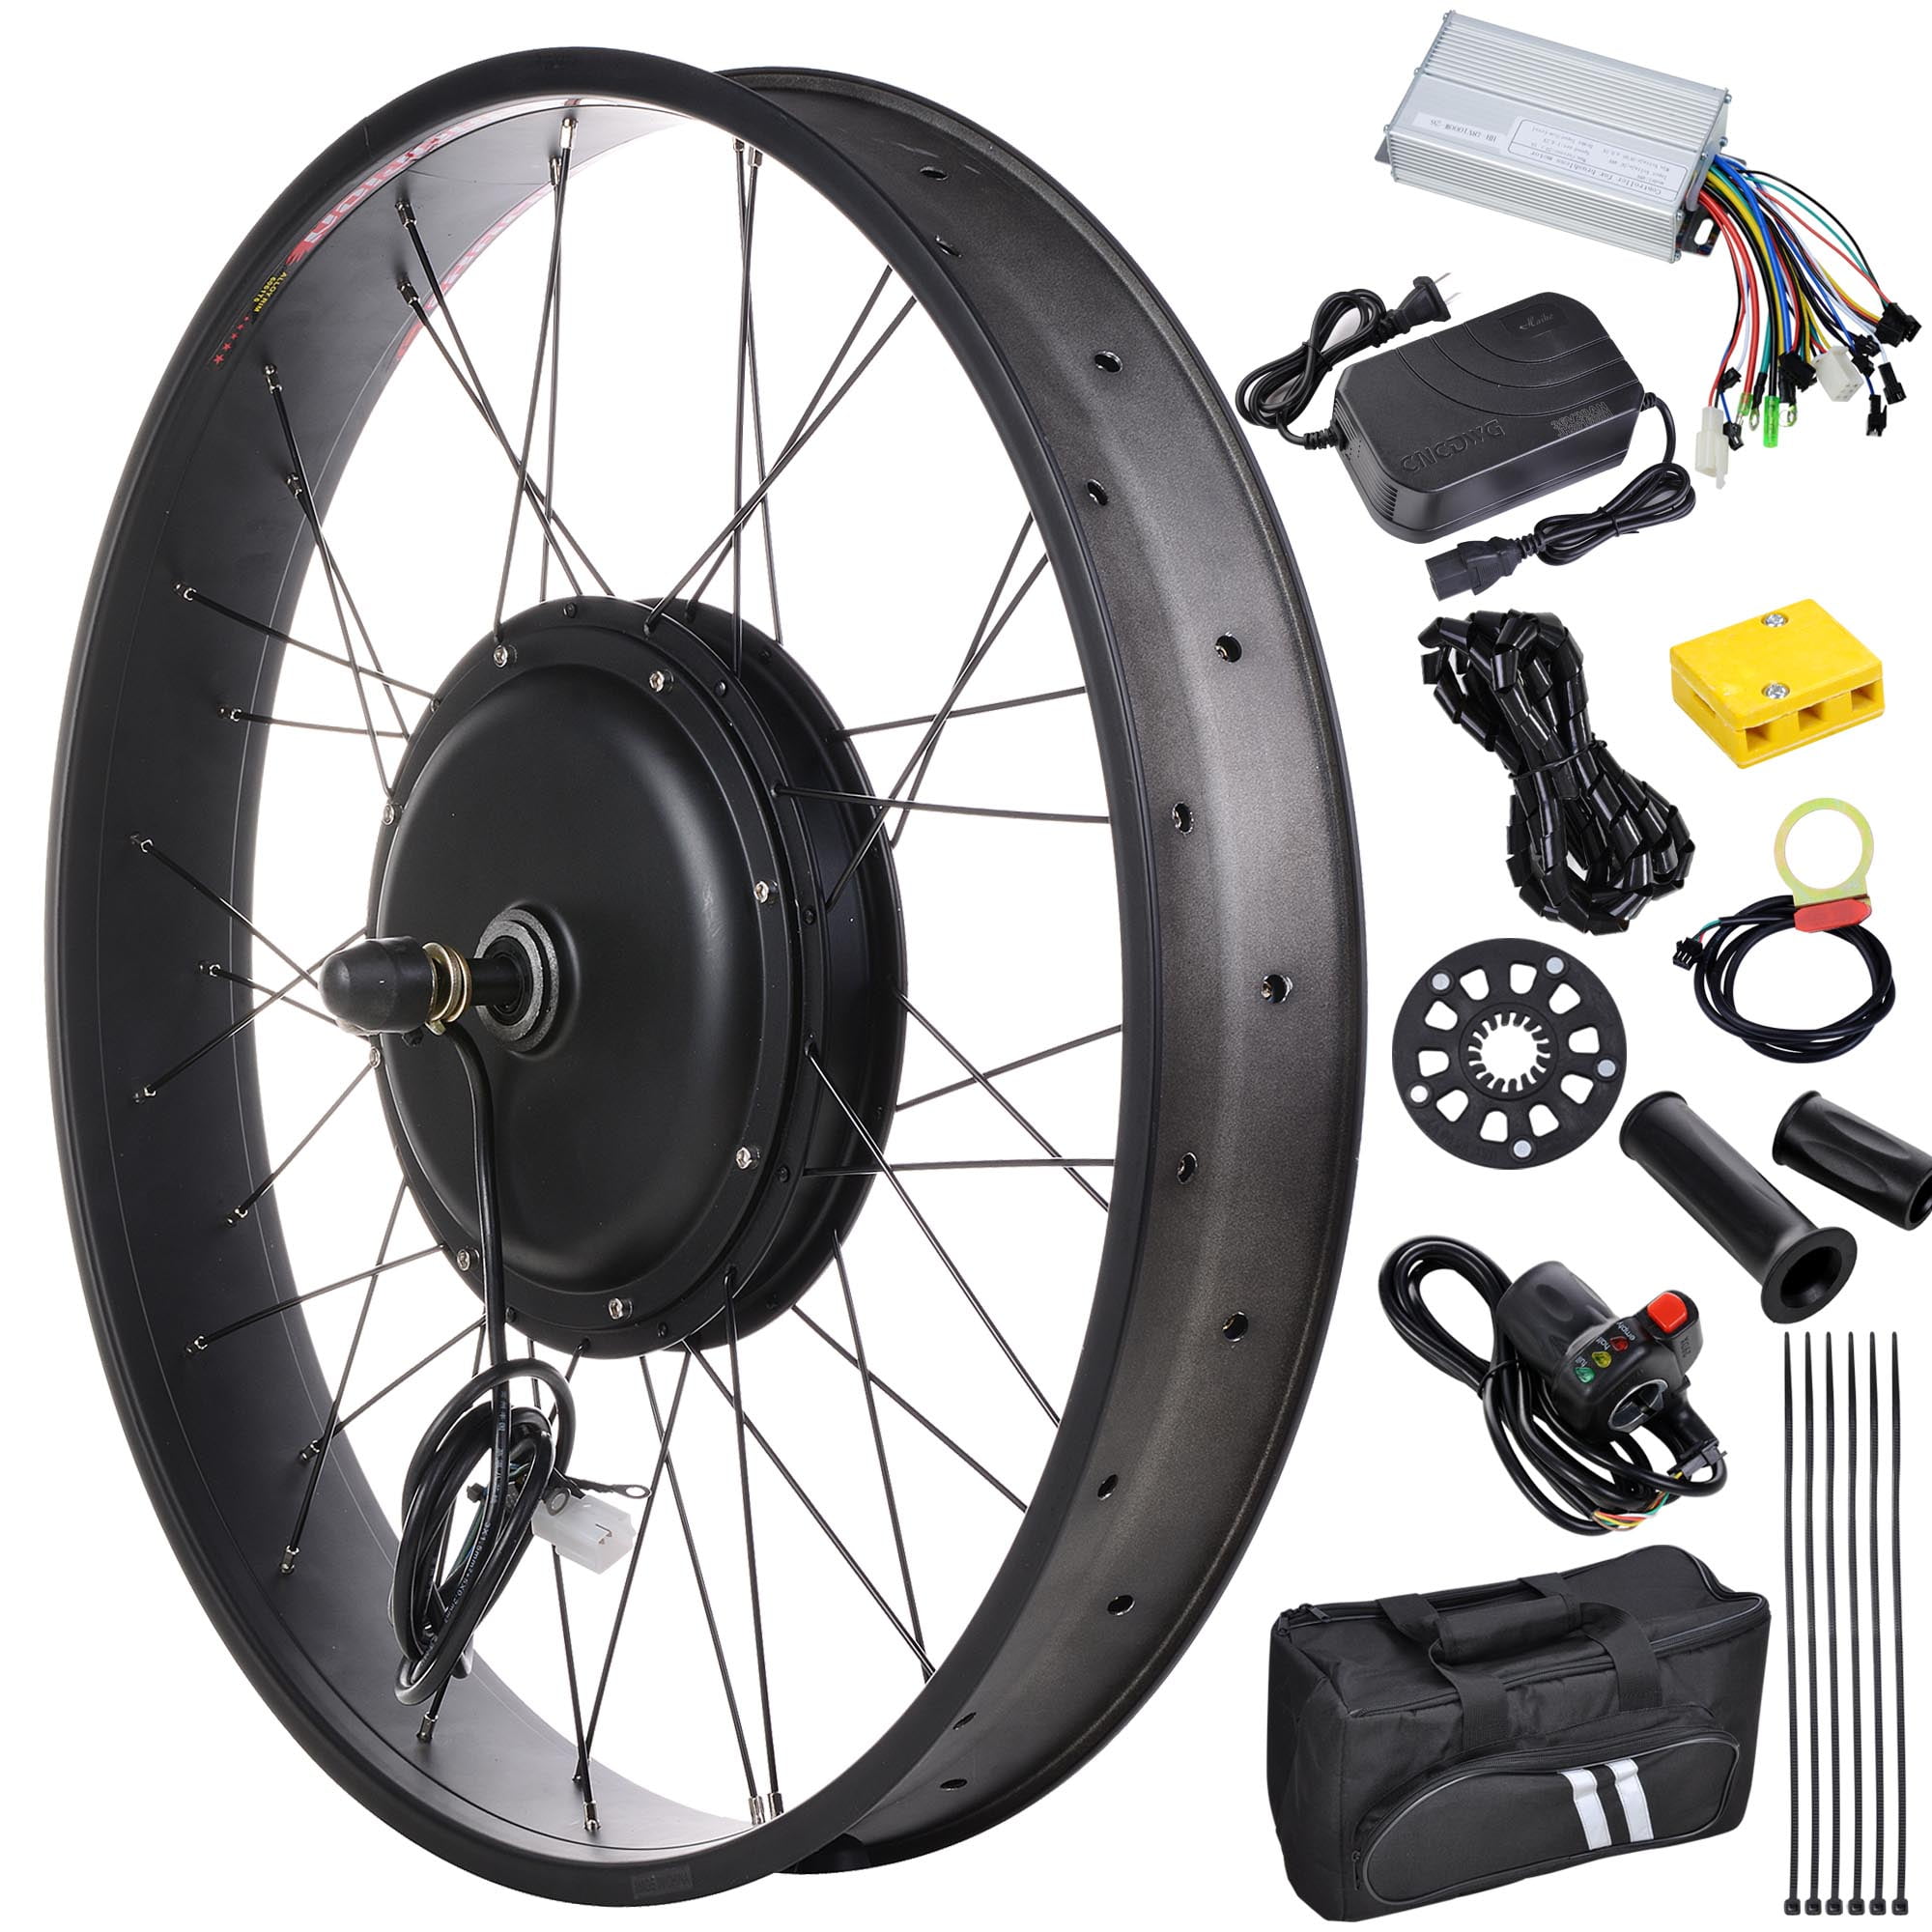 AW 22.5 Electric Bicycle Front Wheel Frame Kit for 26 48V 1000W 470RPM E-Bike 